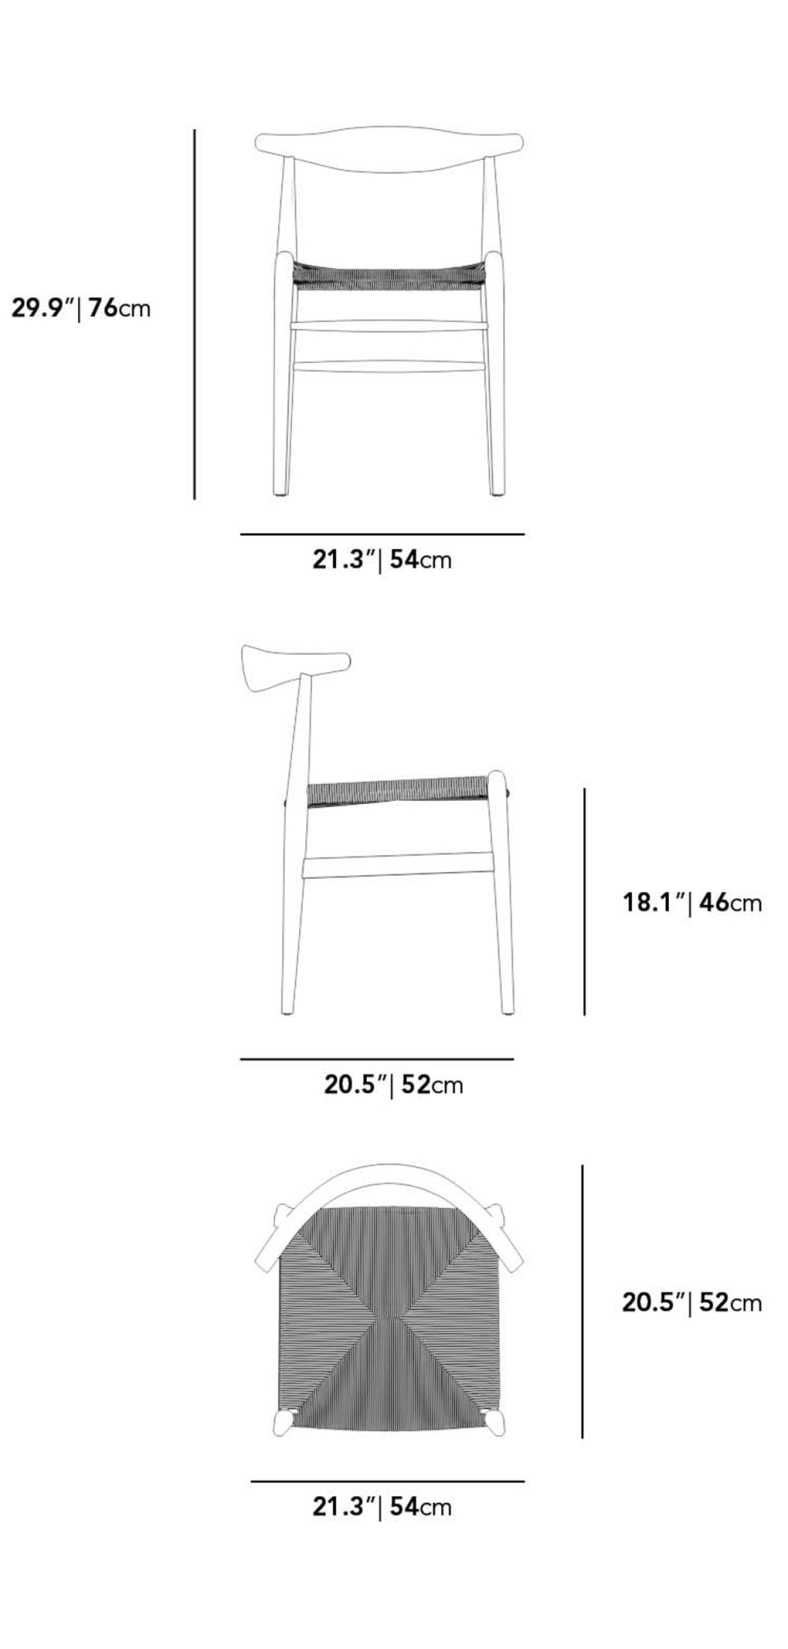 Dimensions for Elbow Chair - Woven